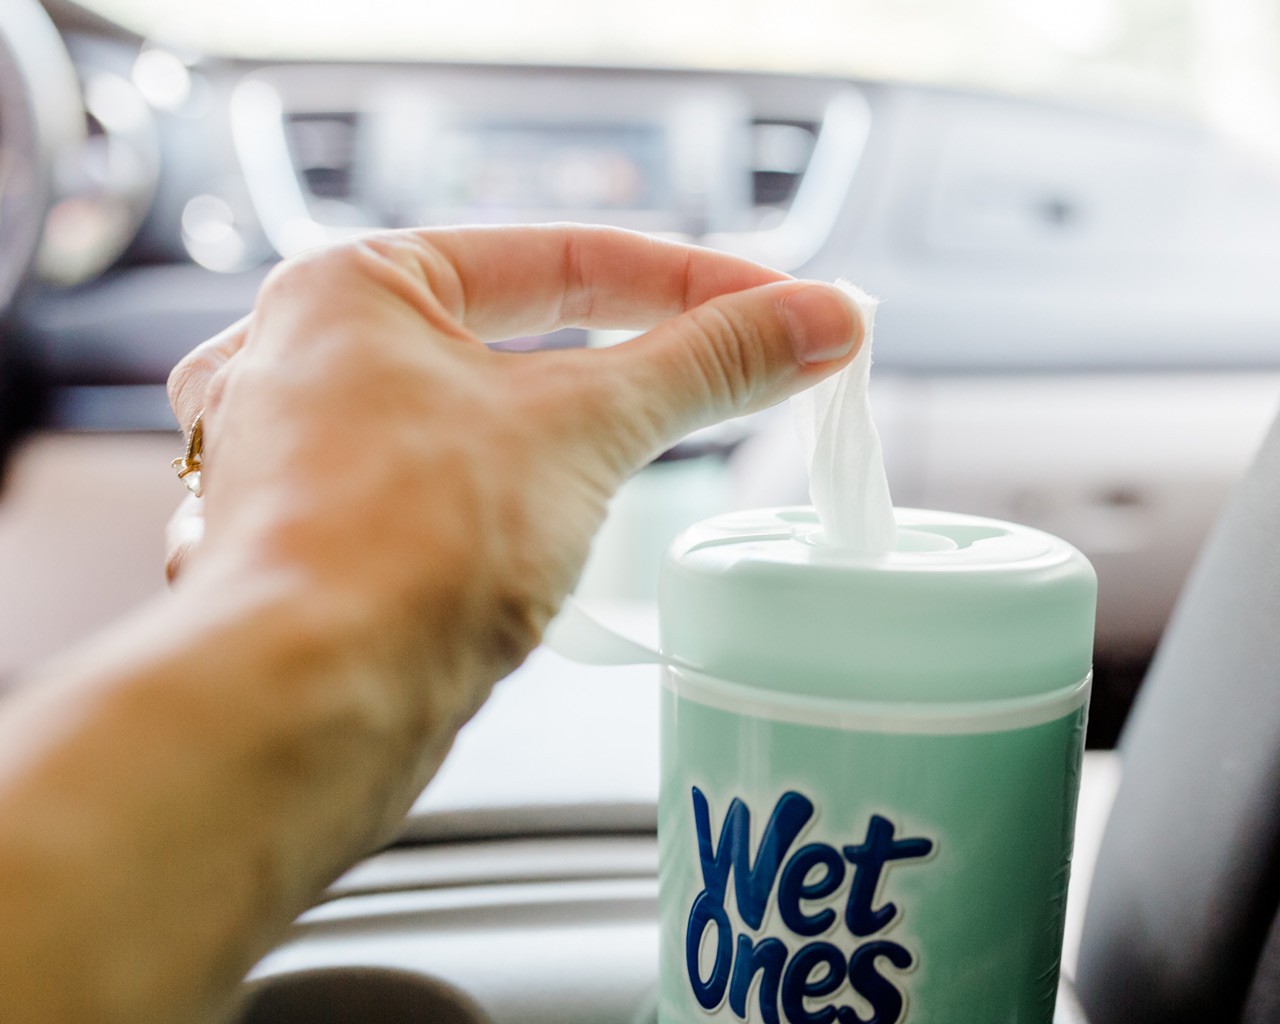 Wet wipes for long road trips